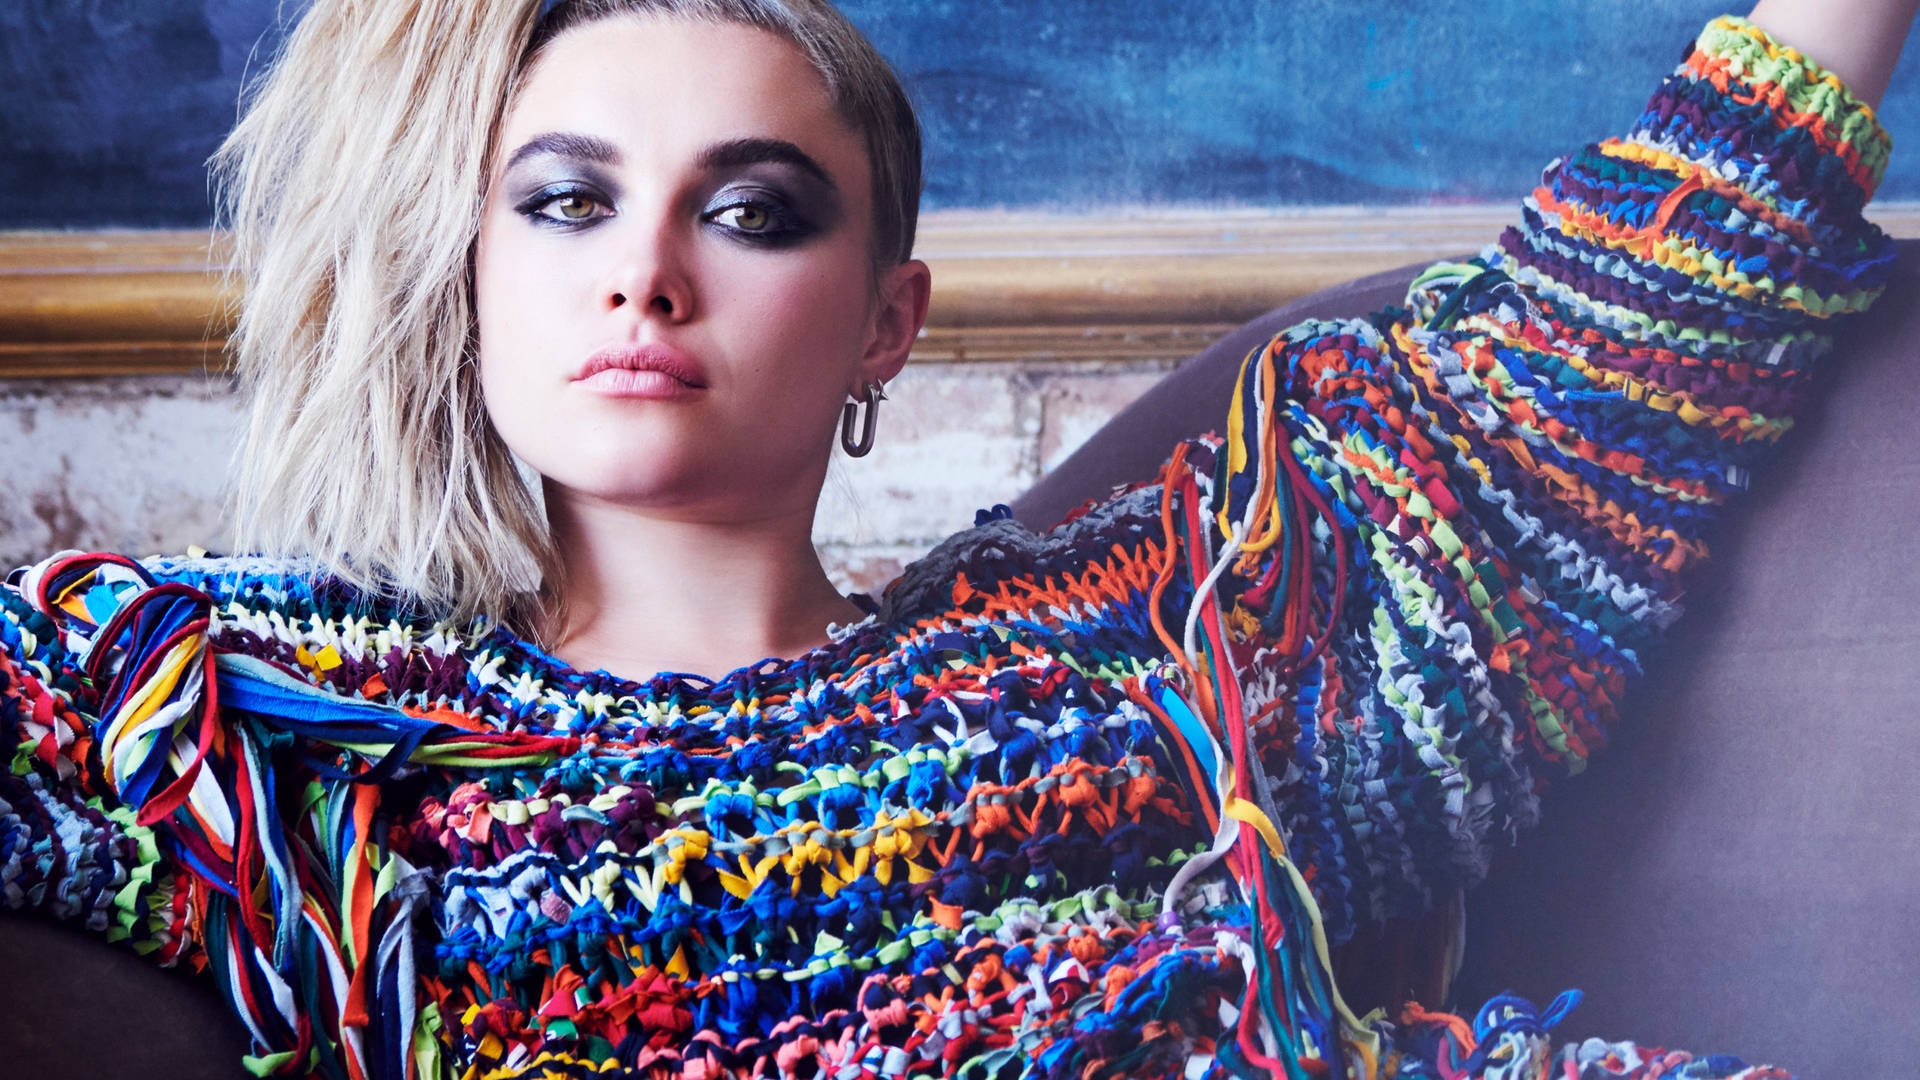 Florence Pugh In Crocheted Sweater Background